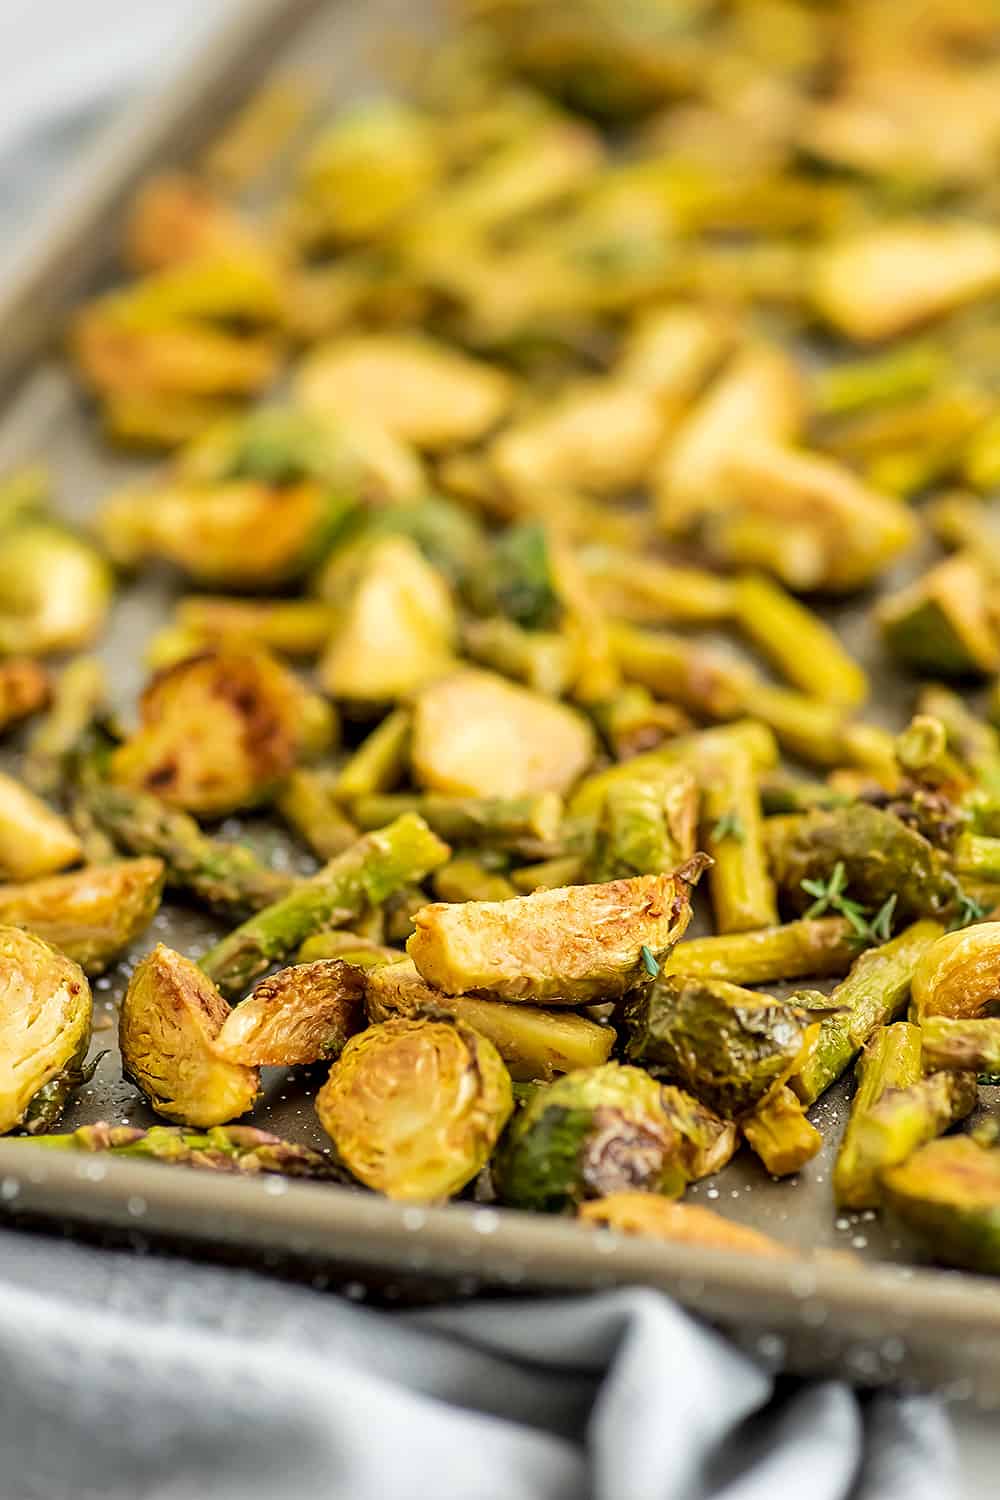 Asparagus and brussel sprouts roasted on baking sheet. 